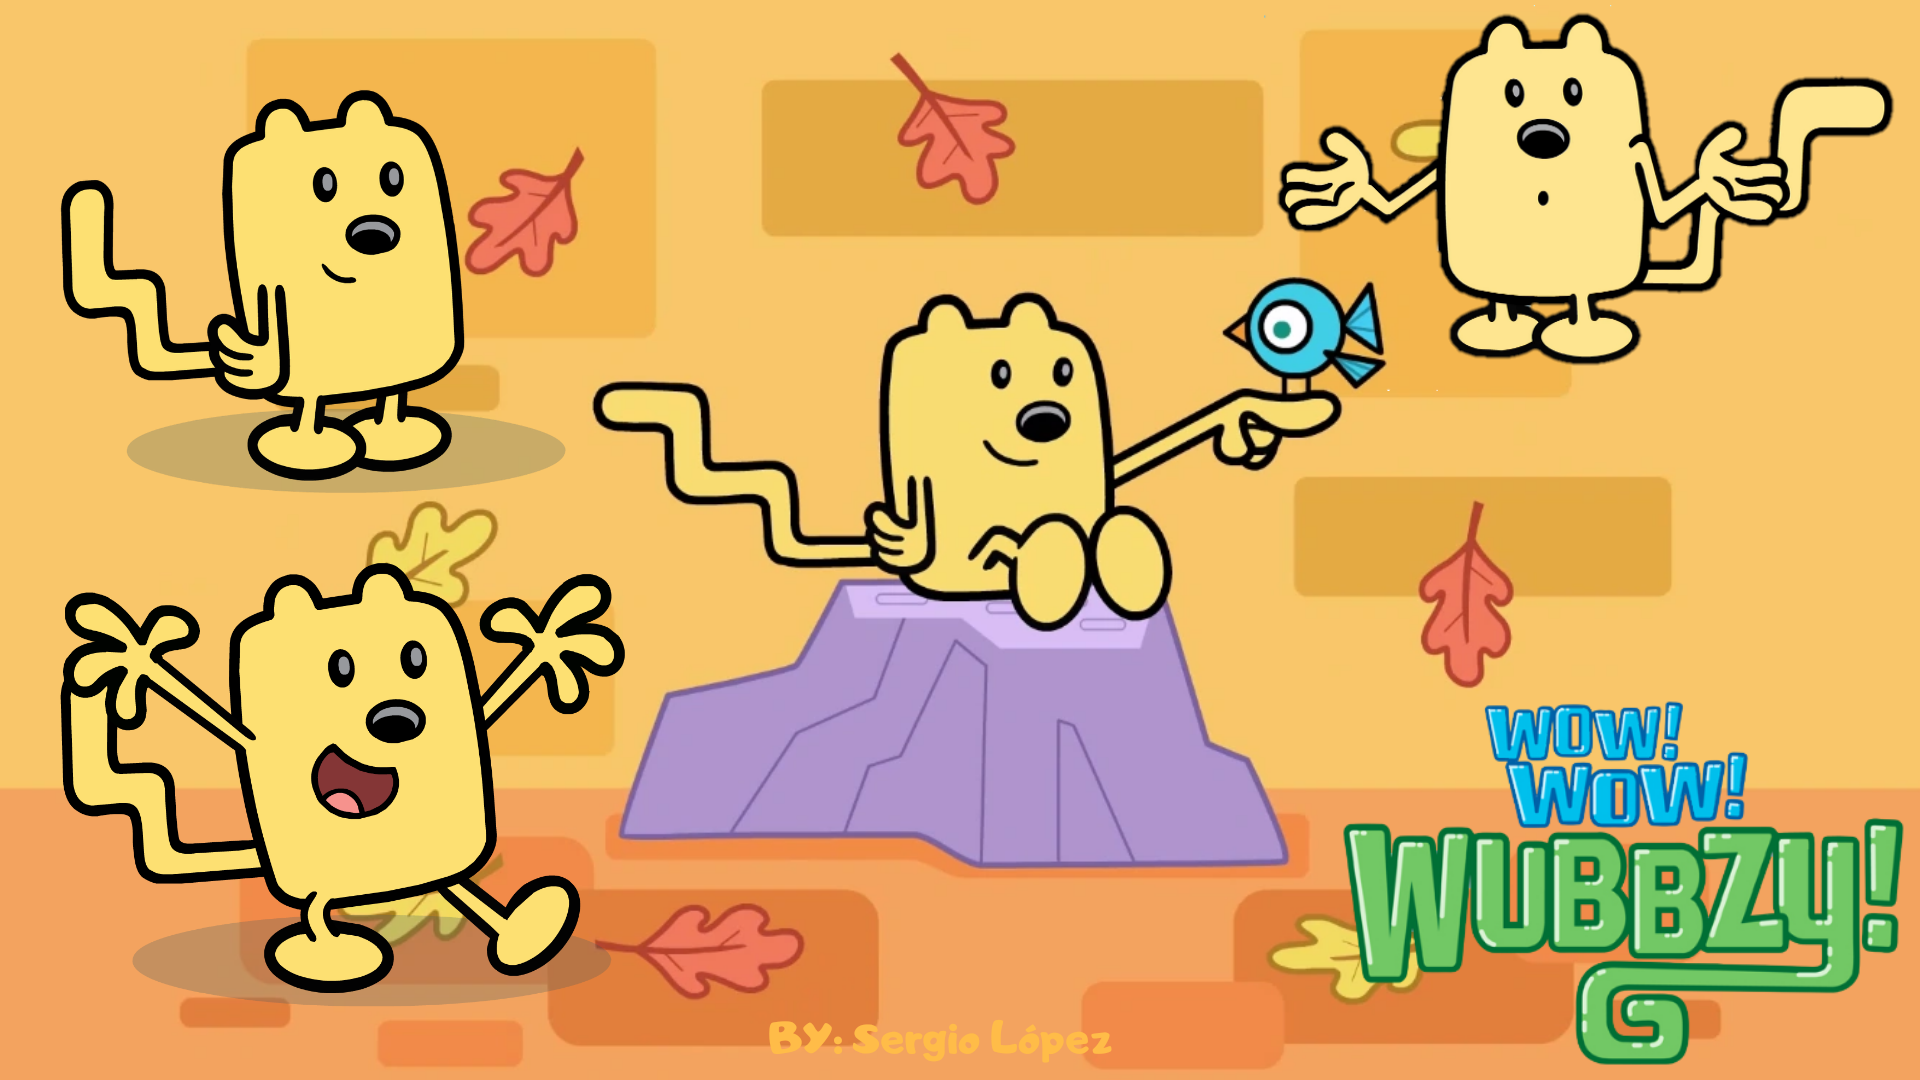 Wow! Wow! Wubbzy! HD Wallpaper and Background Image